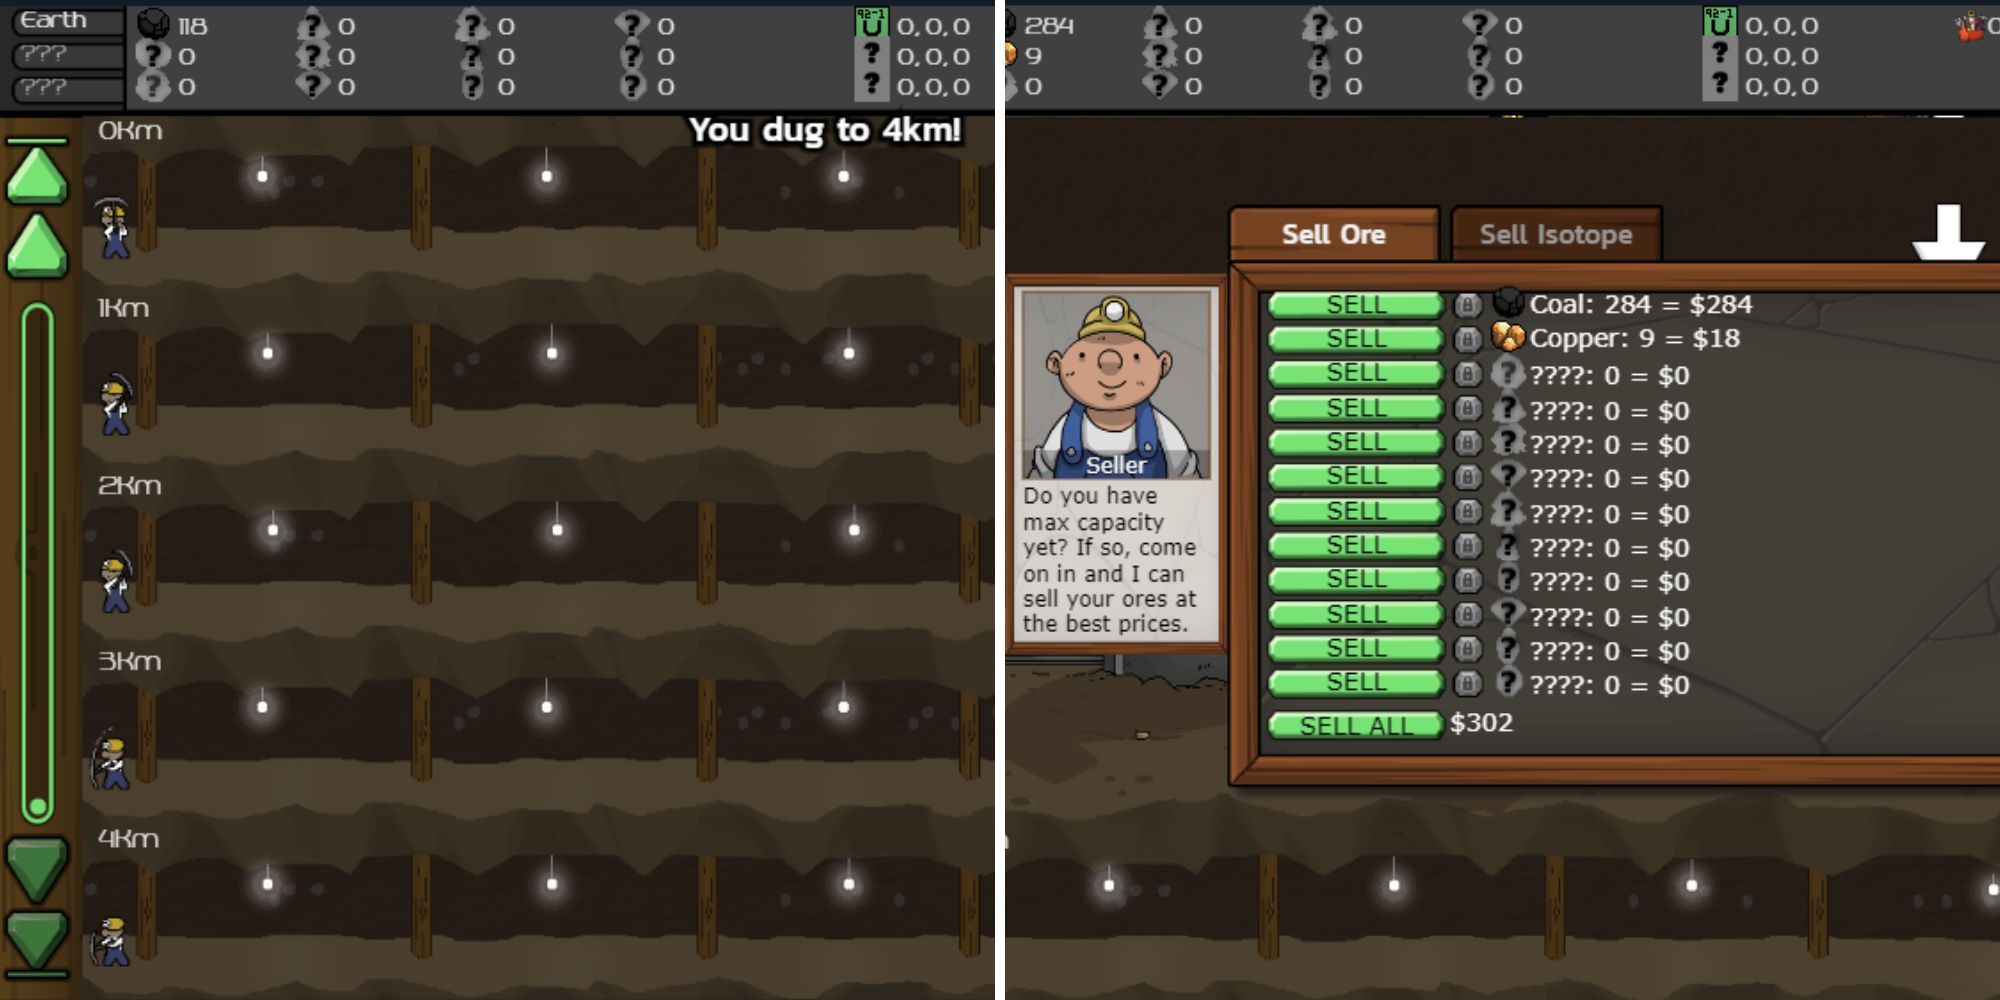 A split image of little 2D miners on various levels of a mine, and a selling UI screen with green buttons.